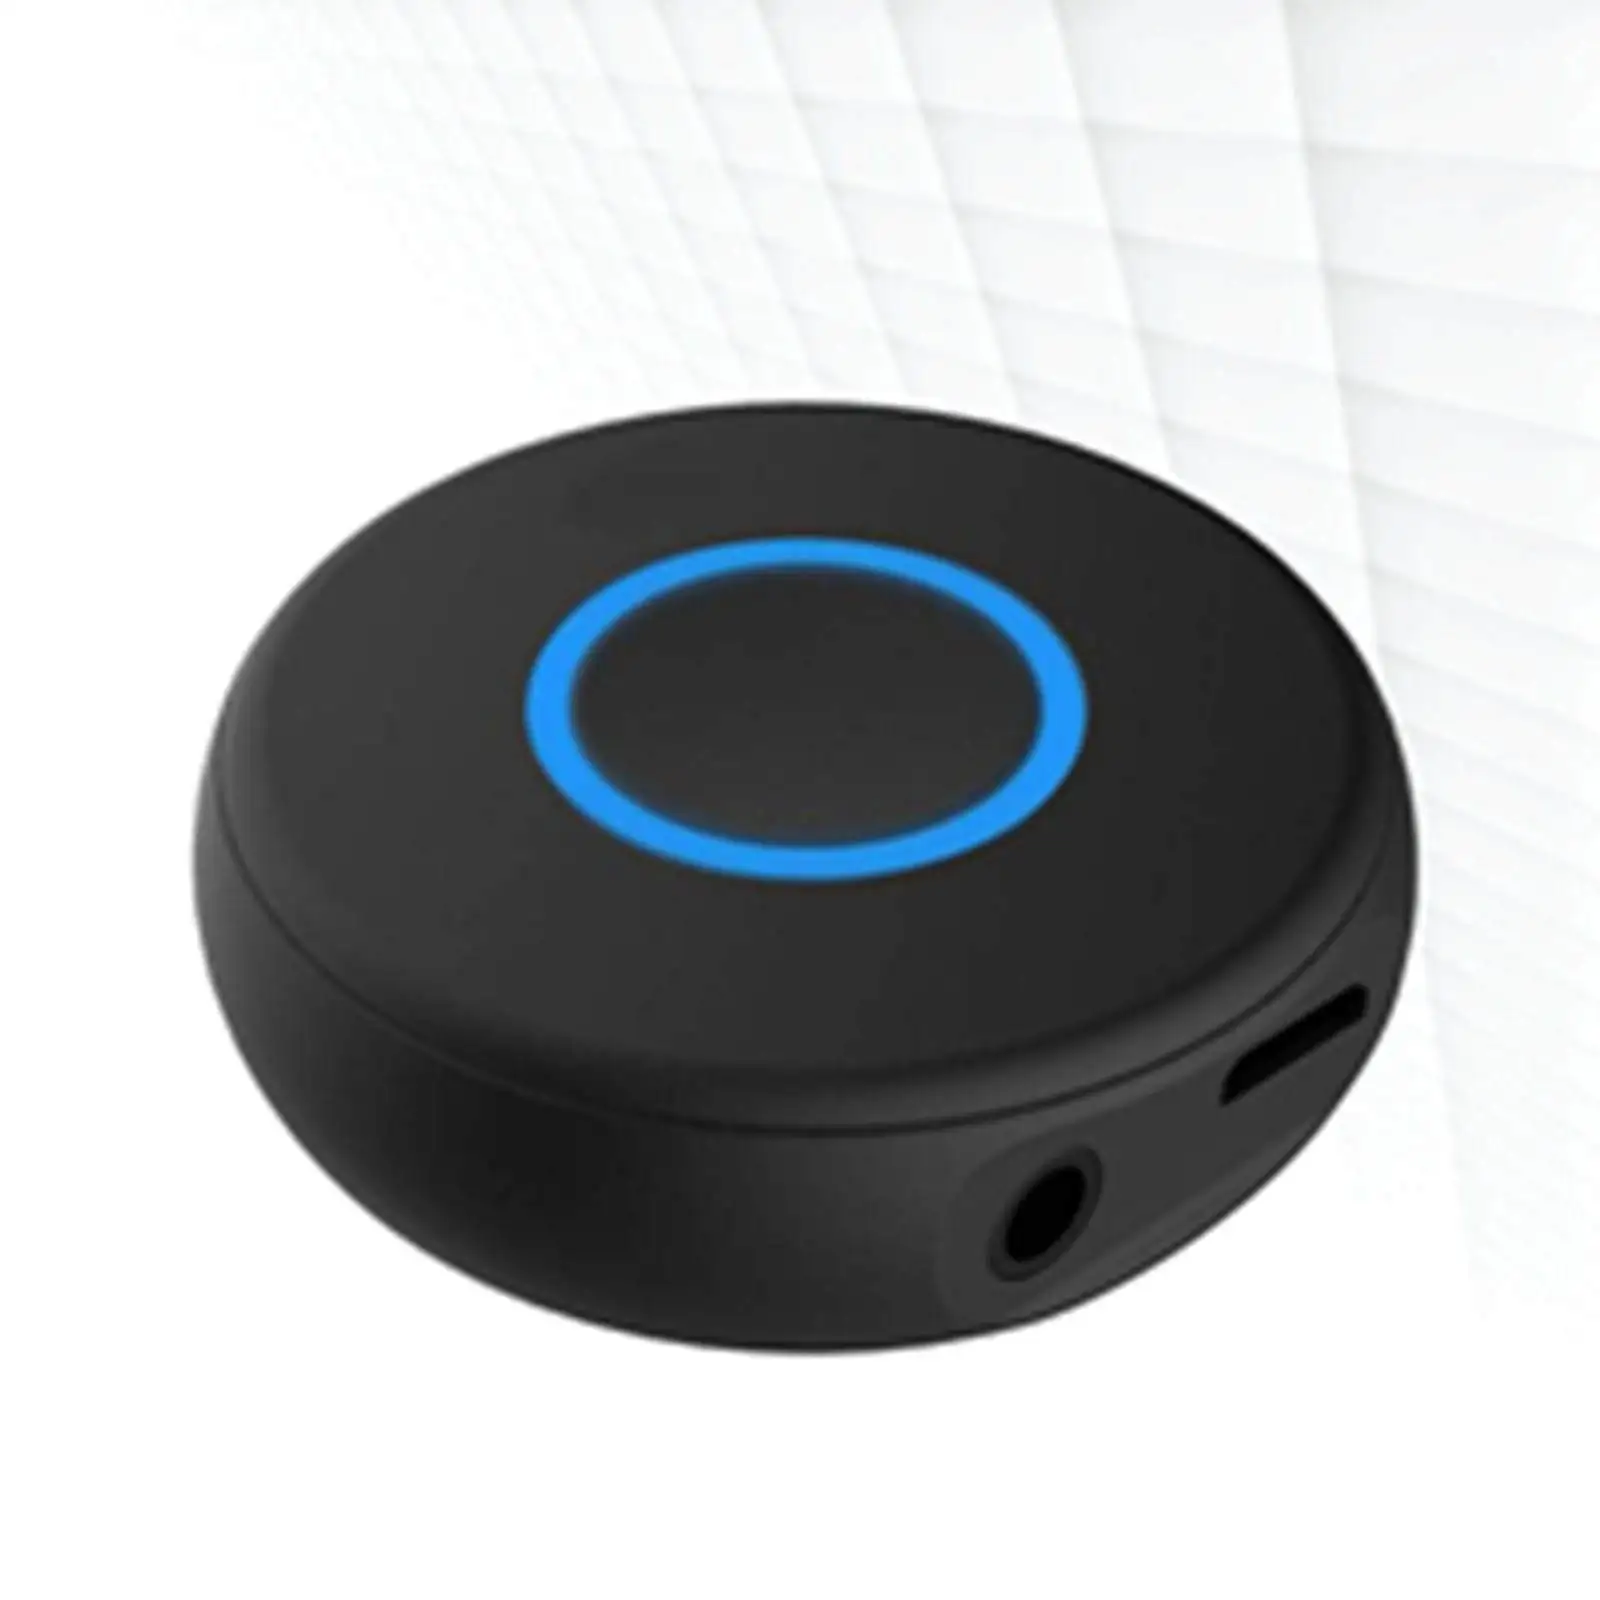 Bluetooth Aux Adapter Transmitter Receiver Wireless Audio Adapter Low Latency for Home Car Music Sound System Portable